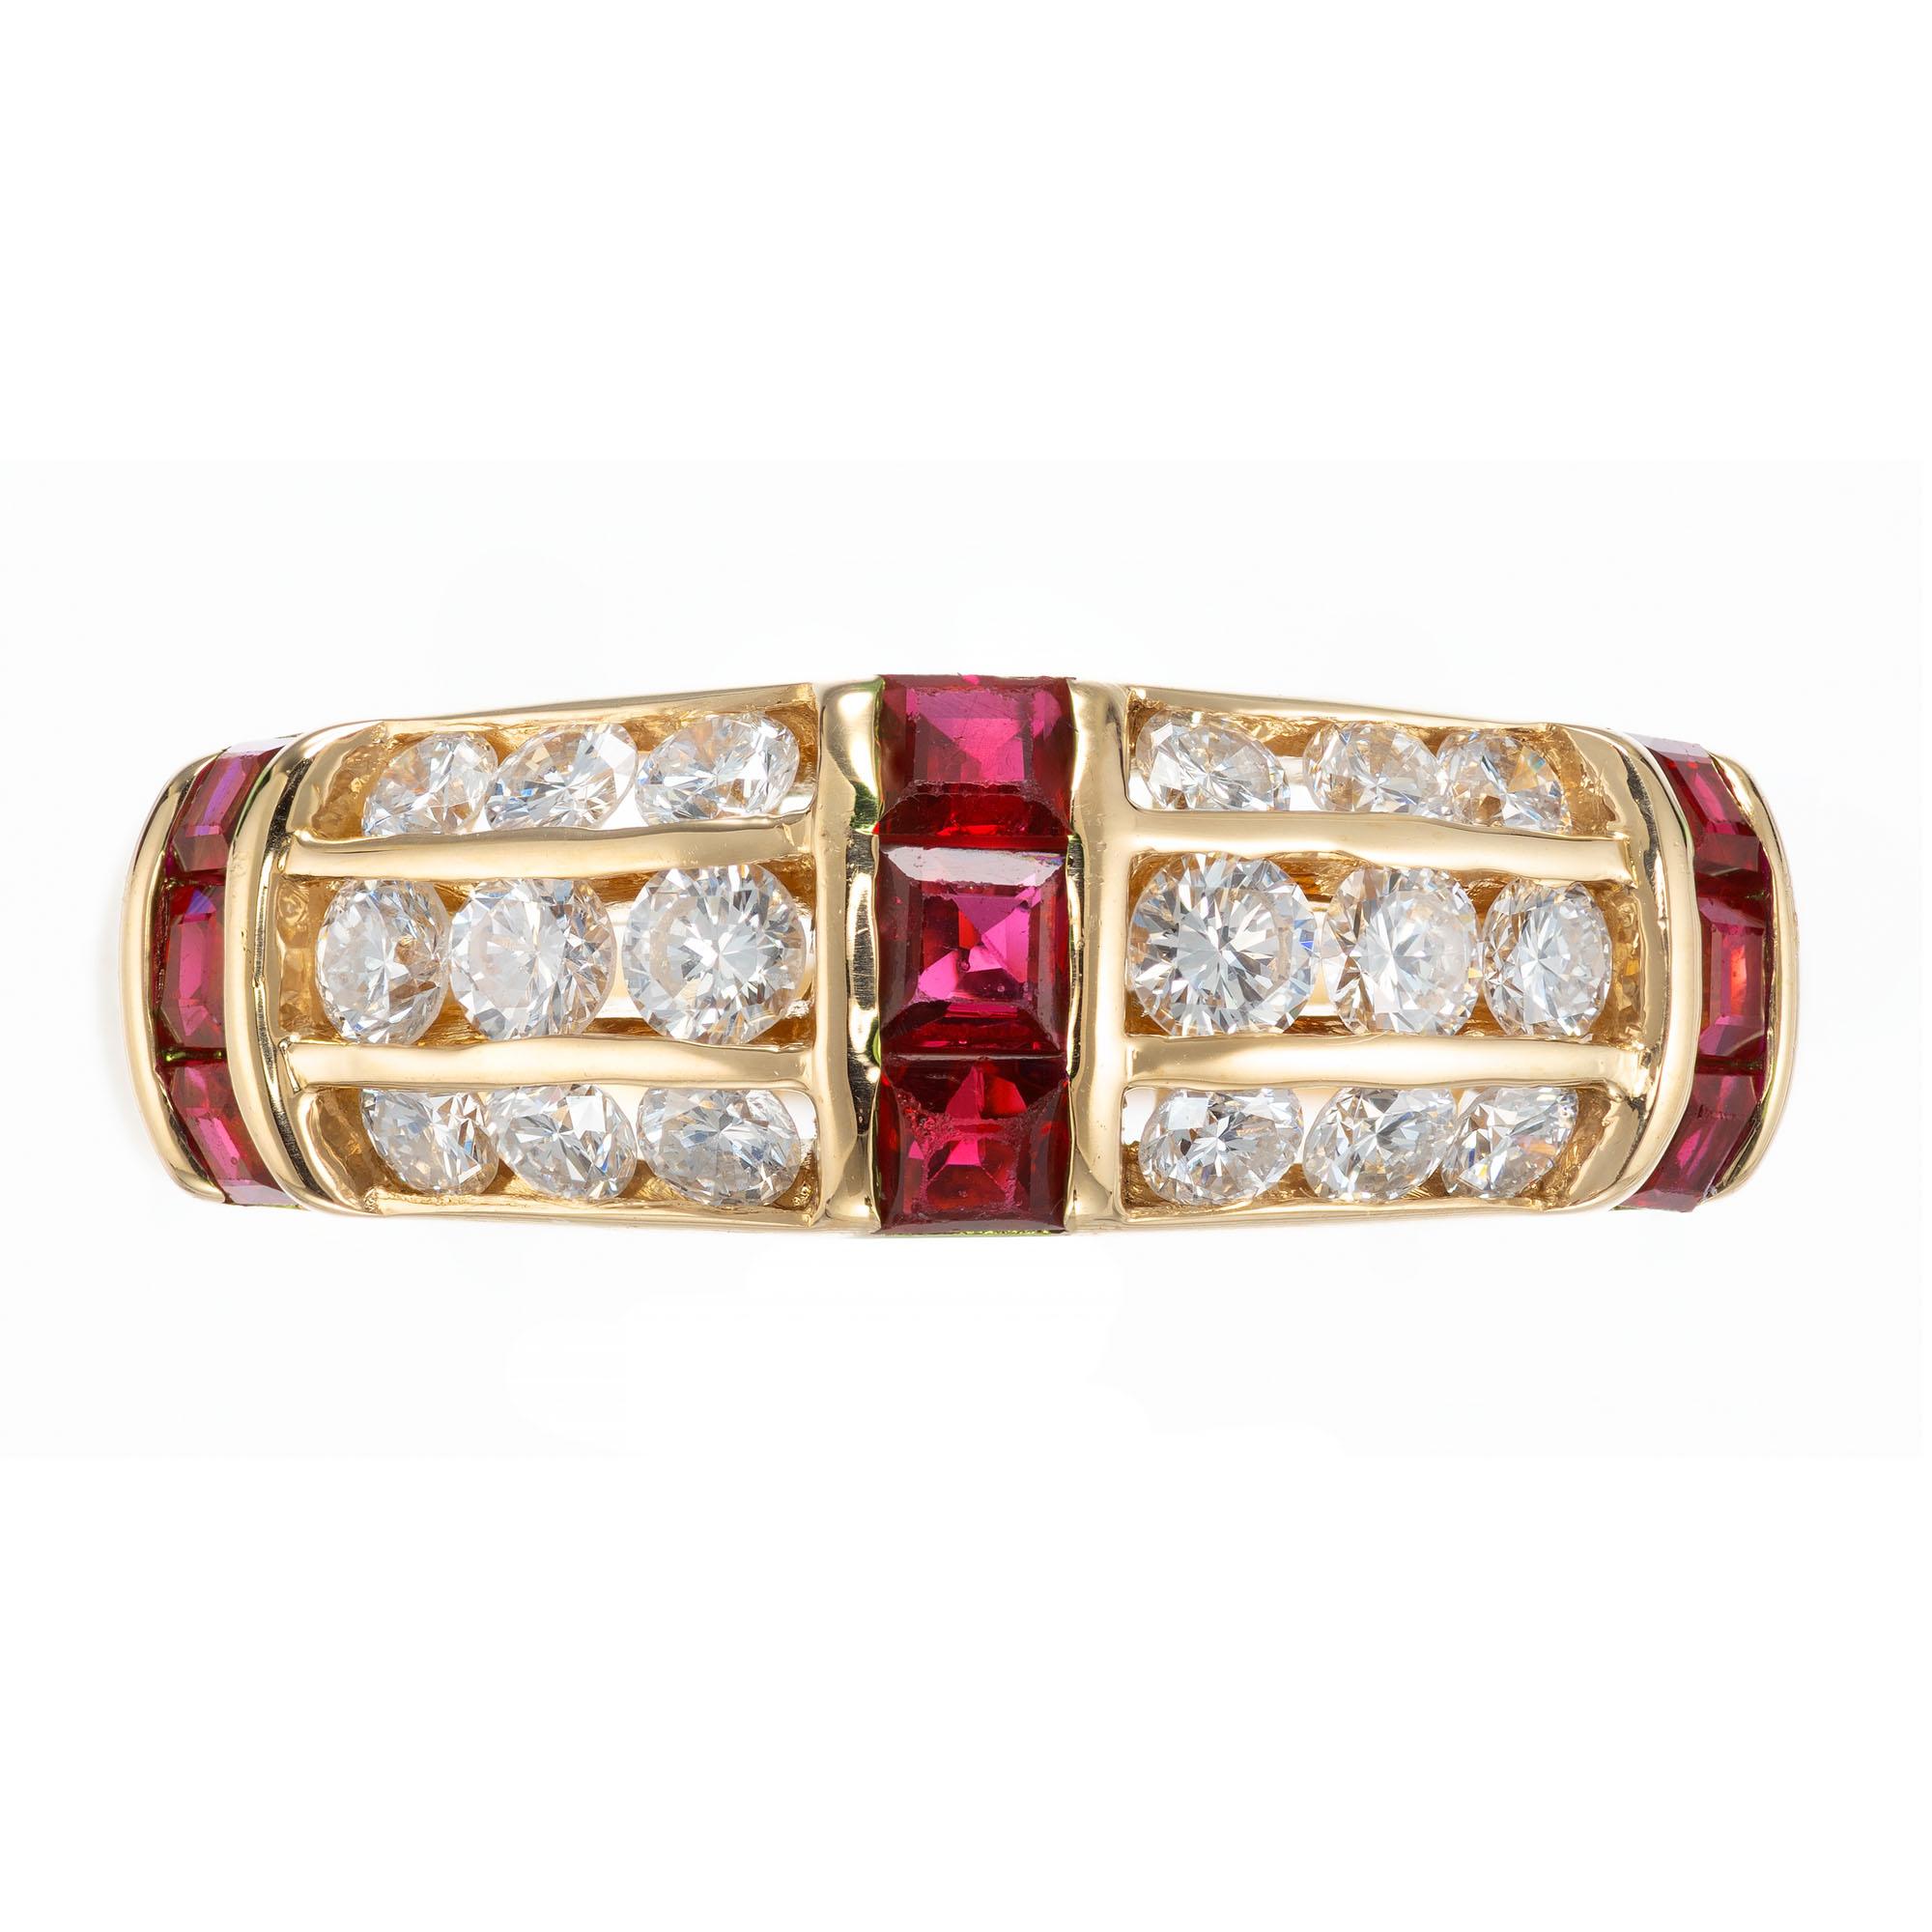 Square step cut rubies and full cut round diamond three row band in 18k yellow gold.

18 round brilliant cut diamonds, G-H VS approx. .54cts
9 step cut red rubies, approx. .25cts
Size 6.5 and sizable 
18k yellow gold
Stamped: 750
4.3 grams
Width at